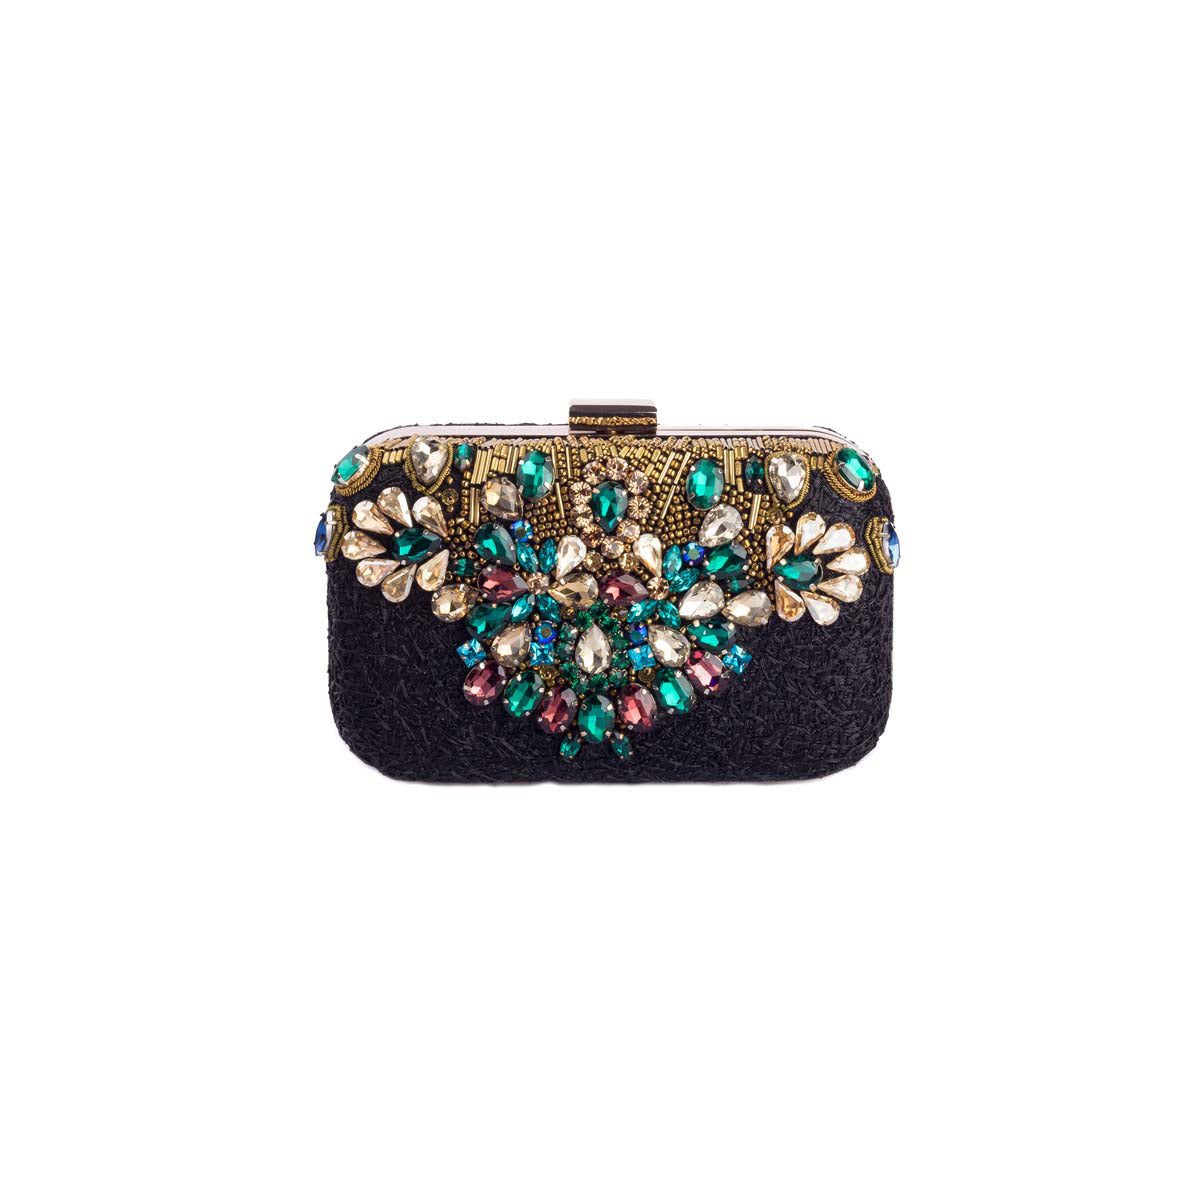 Bring your outfit some essential spice with this black textured clutch with multi colour stones and gold metallic embellishment.